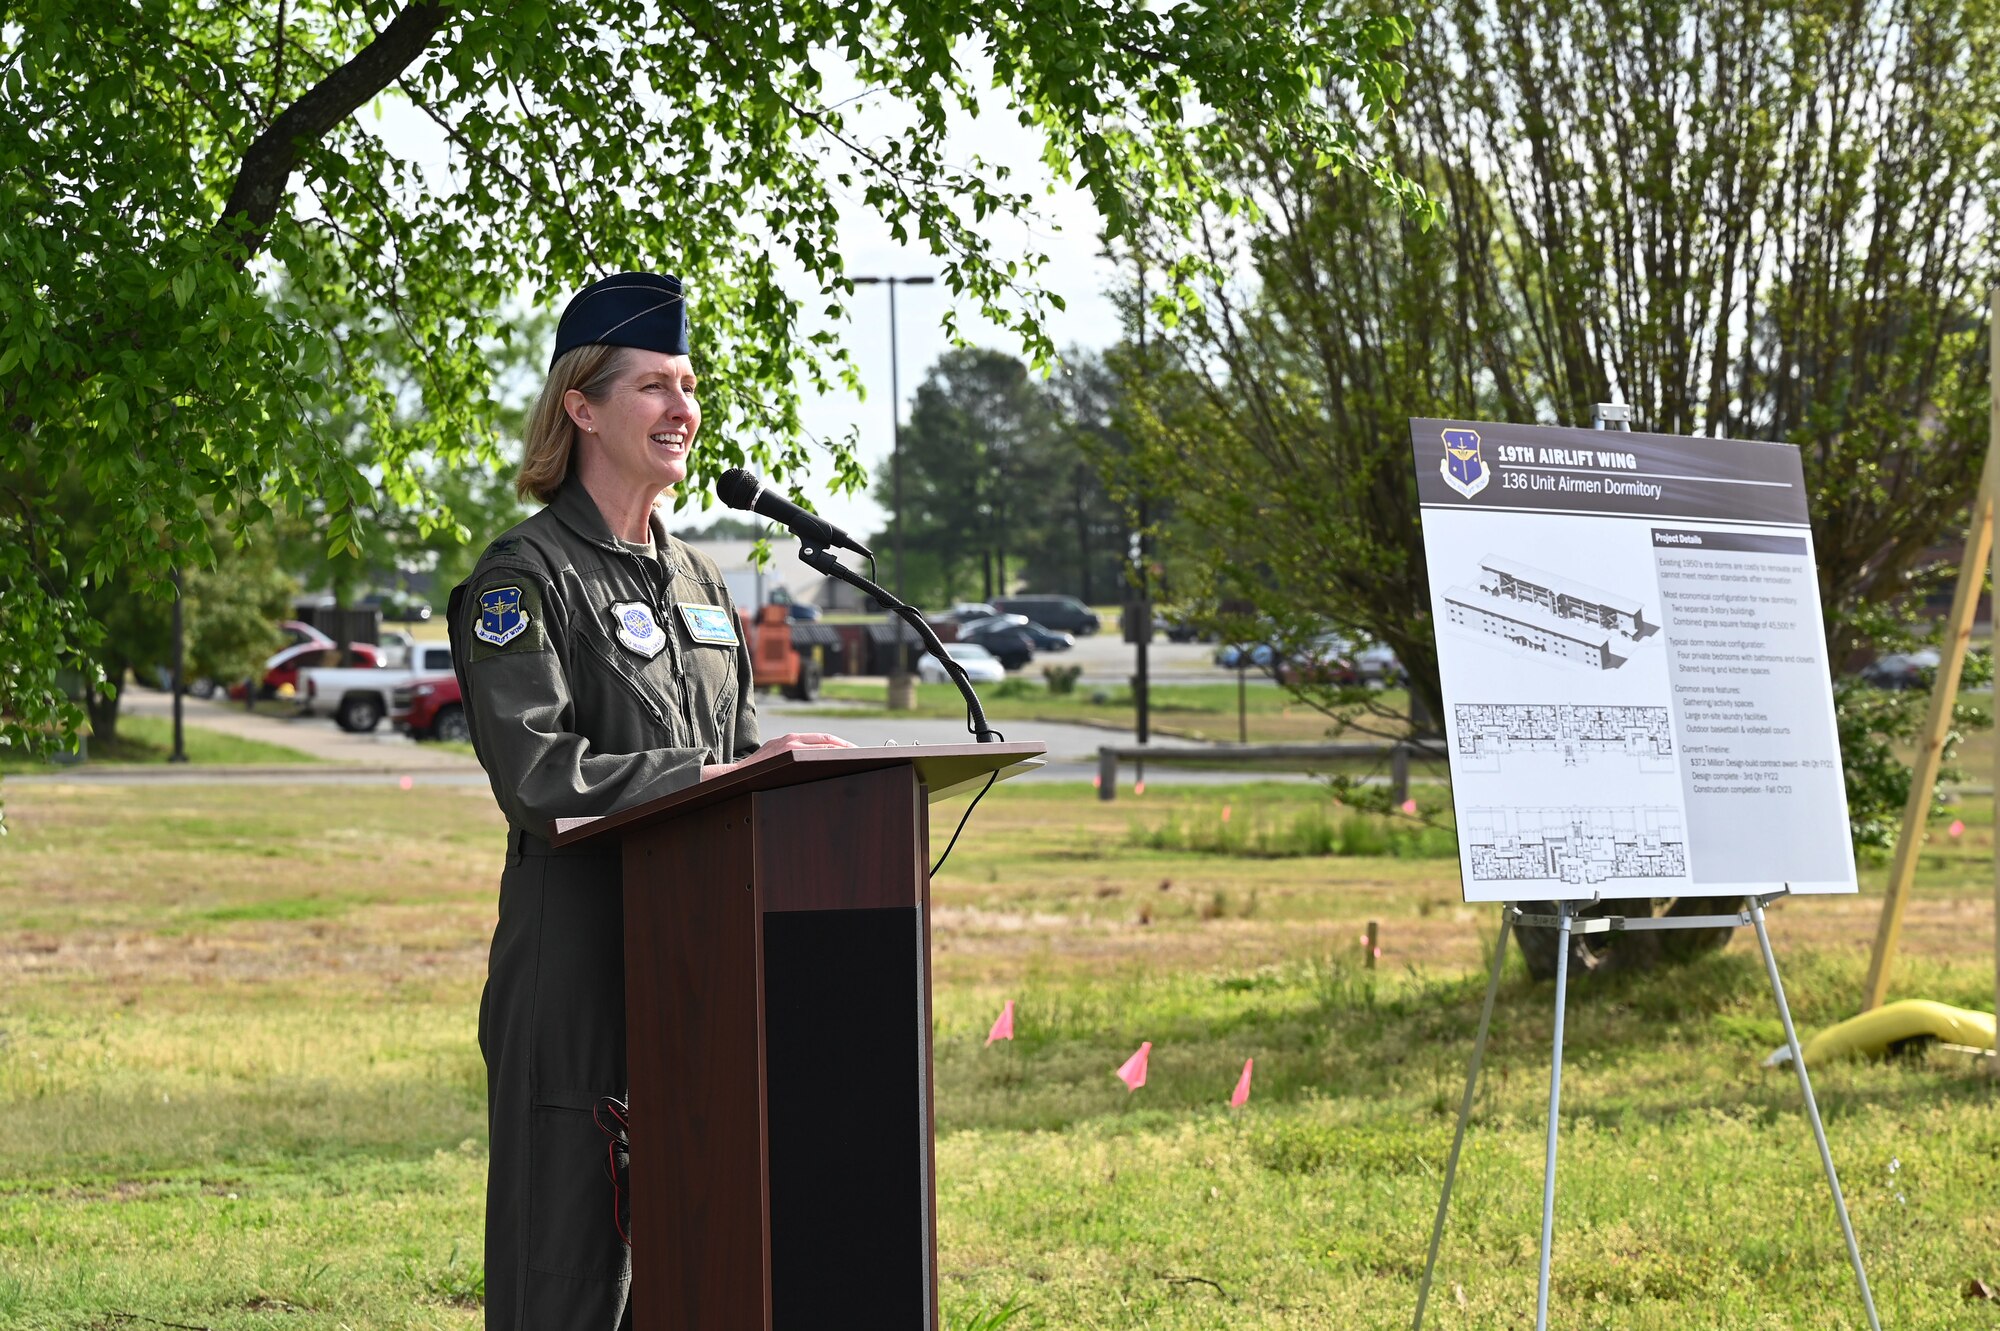 Col. Angela Ochoa, 19th Airlift Wing commander, provides opening remarks project during a groundbreaking ceremony